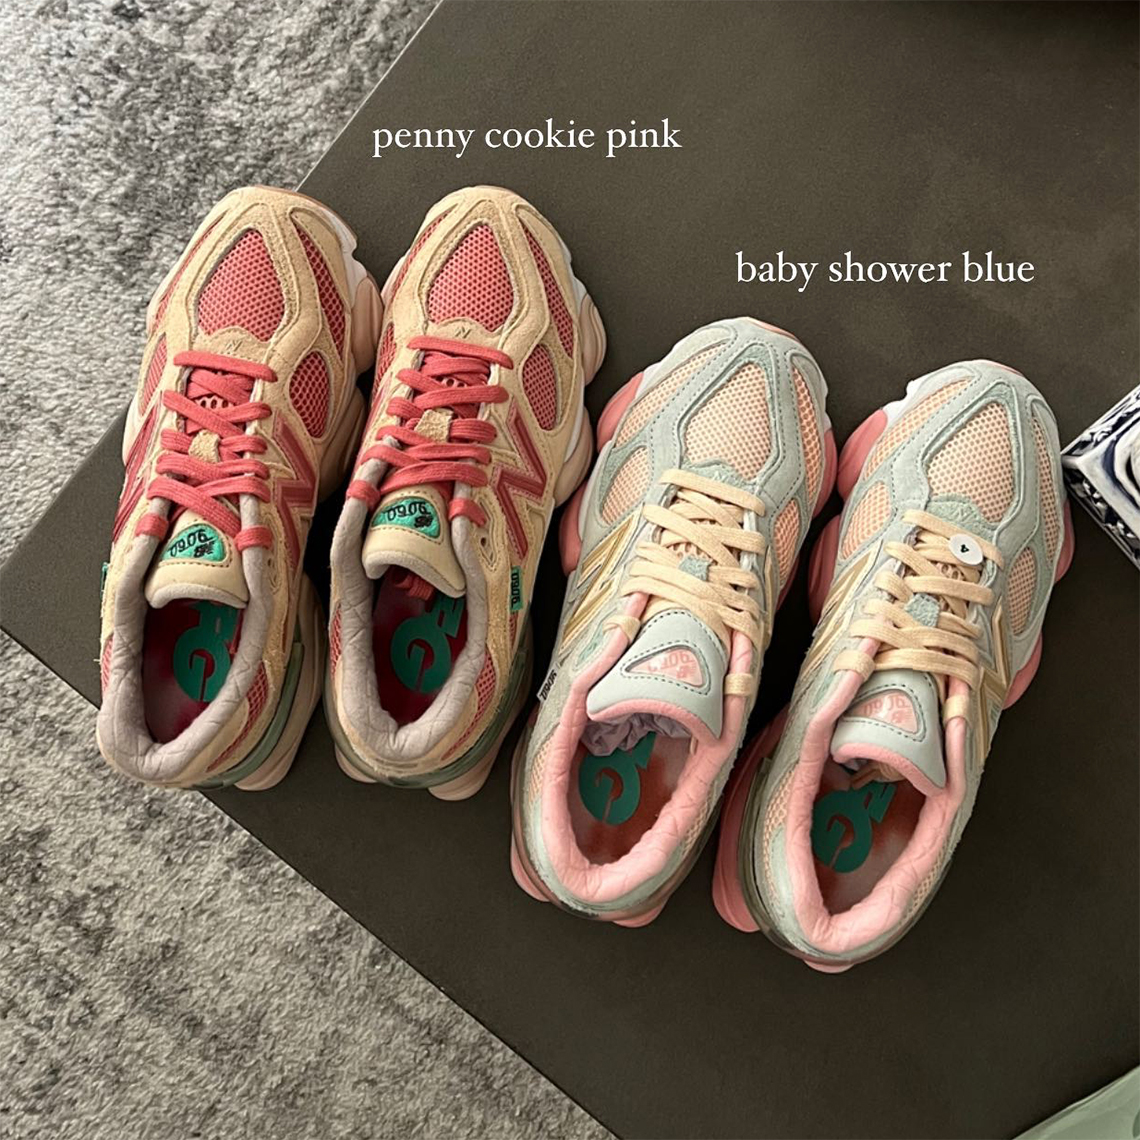 Joe Freshgoods New Balance UL420V2 lace-up sneakers Schwarz Baby Shower Blue Penny Cookie Pink